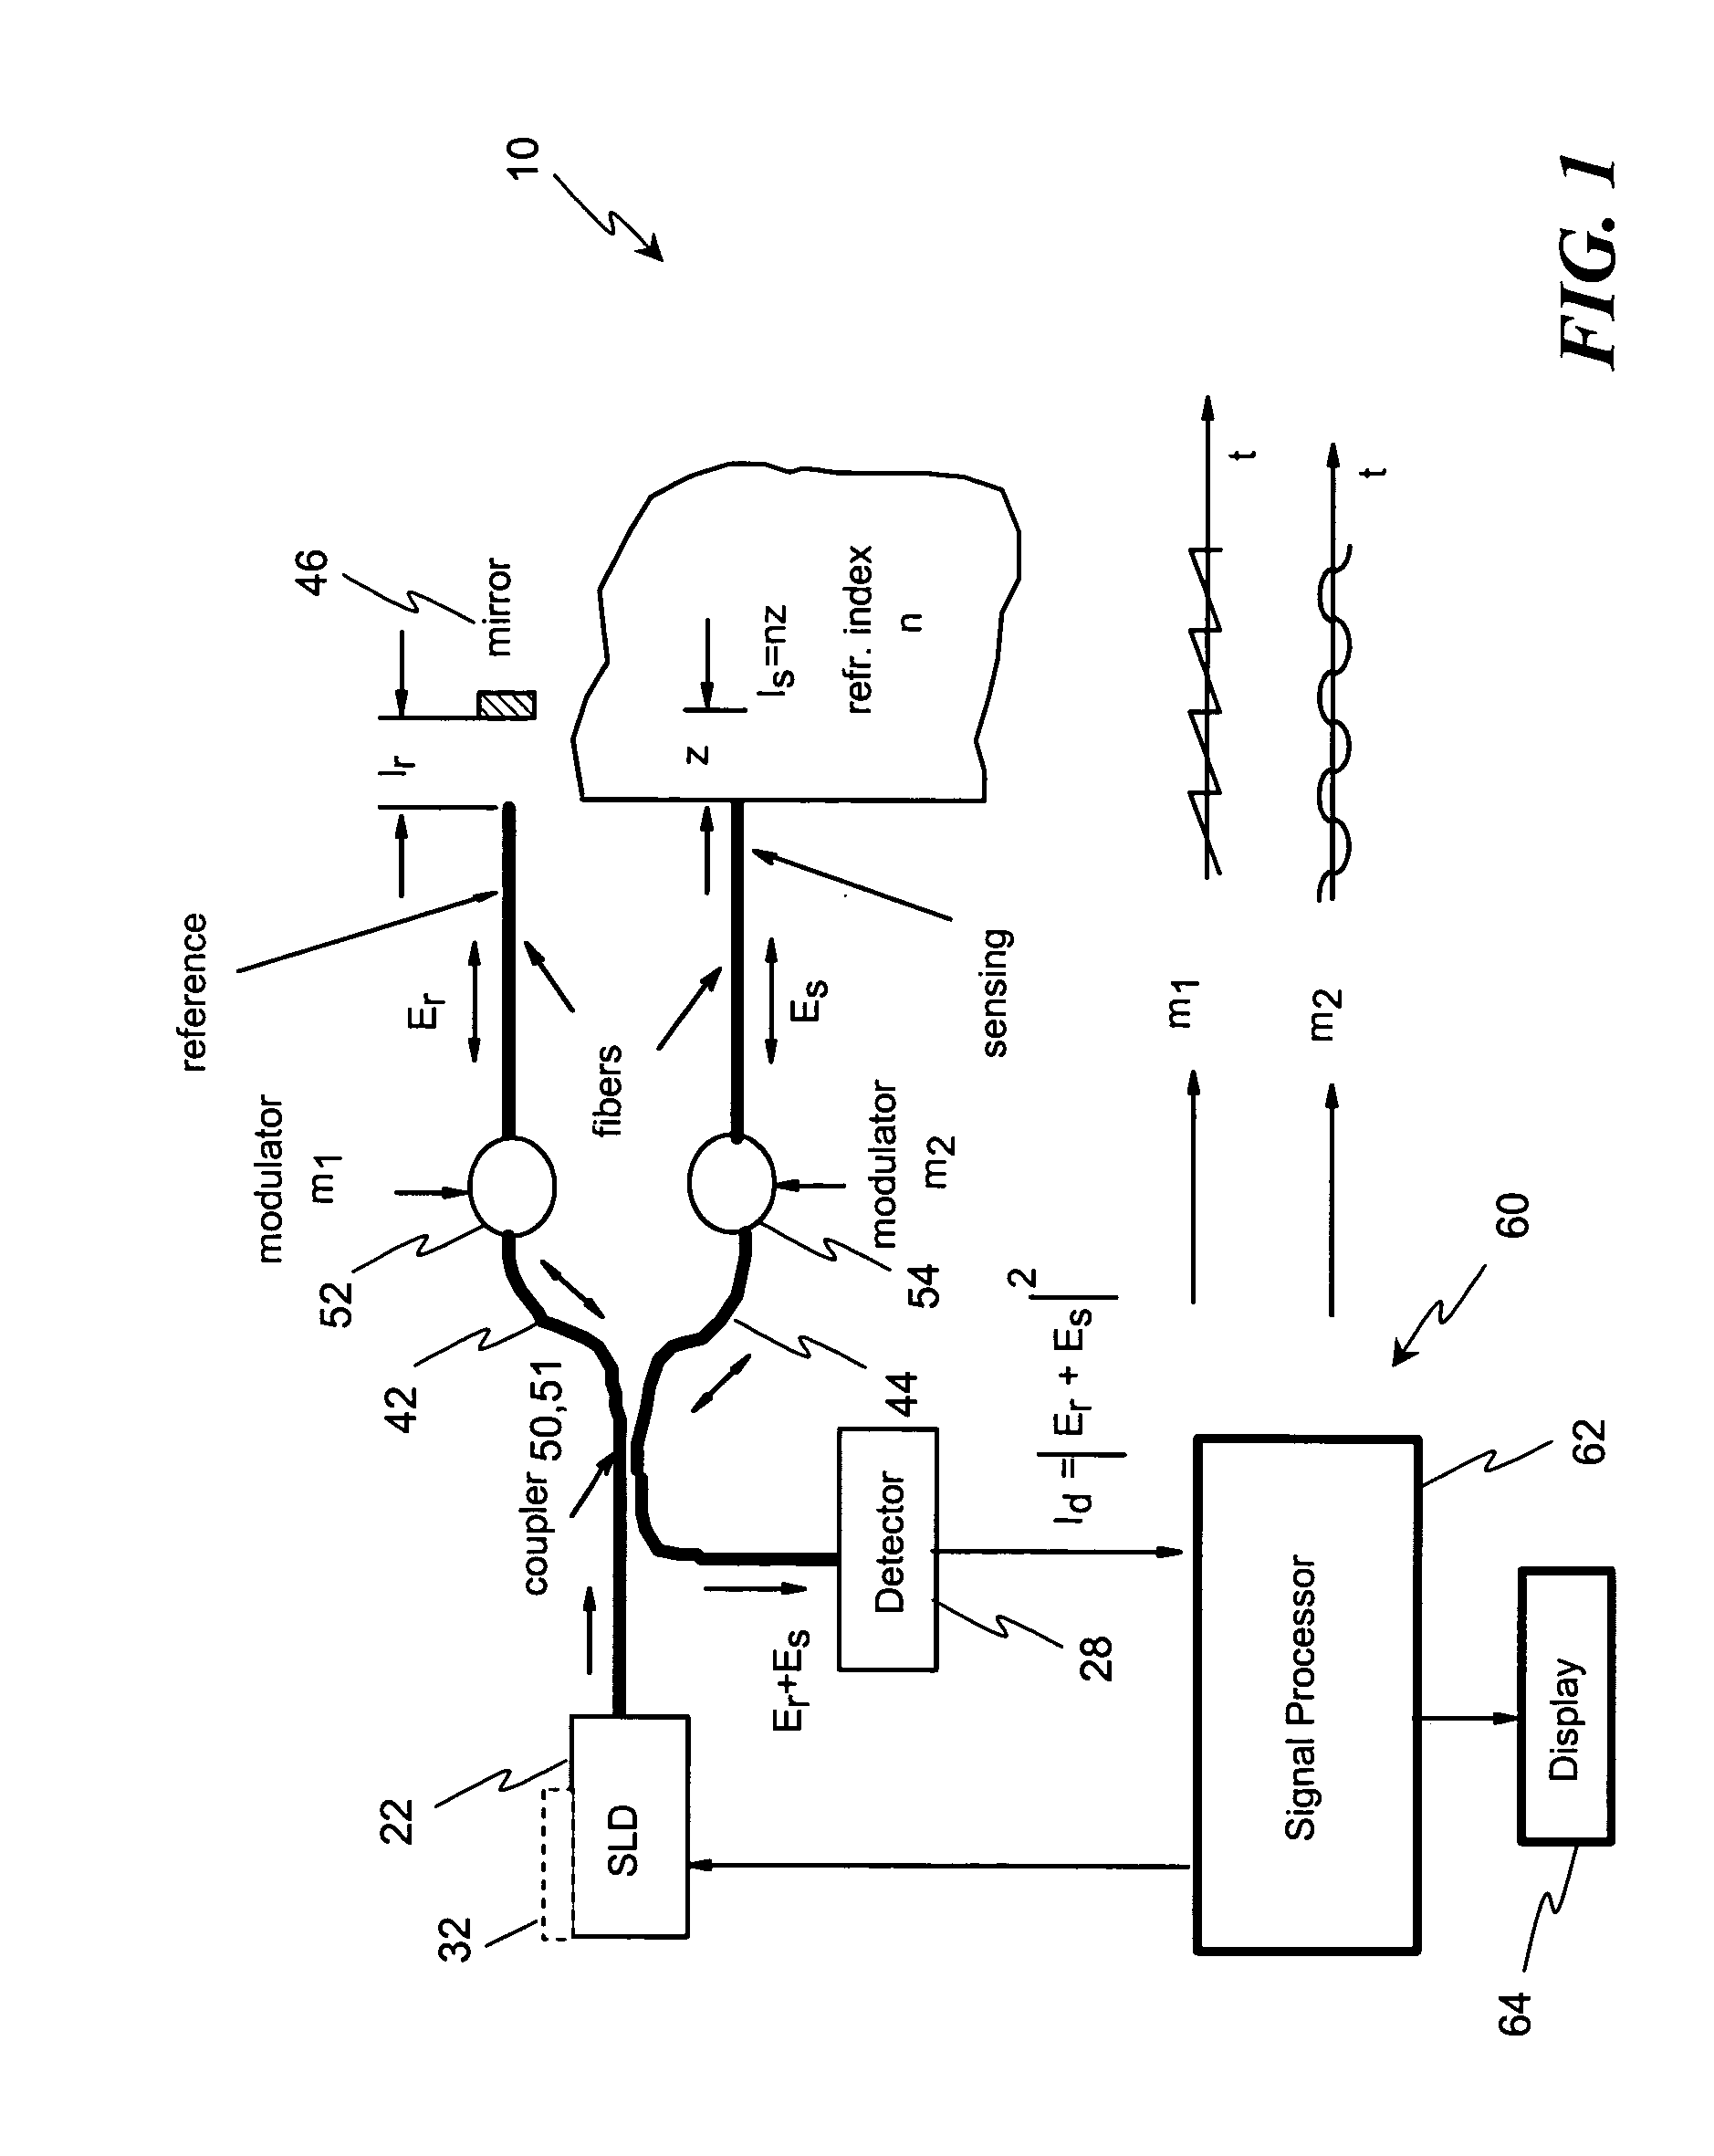 Low coherence interferometric system for optical metrology